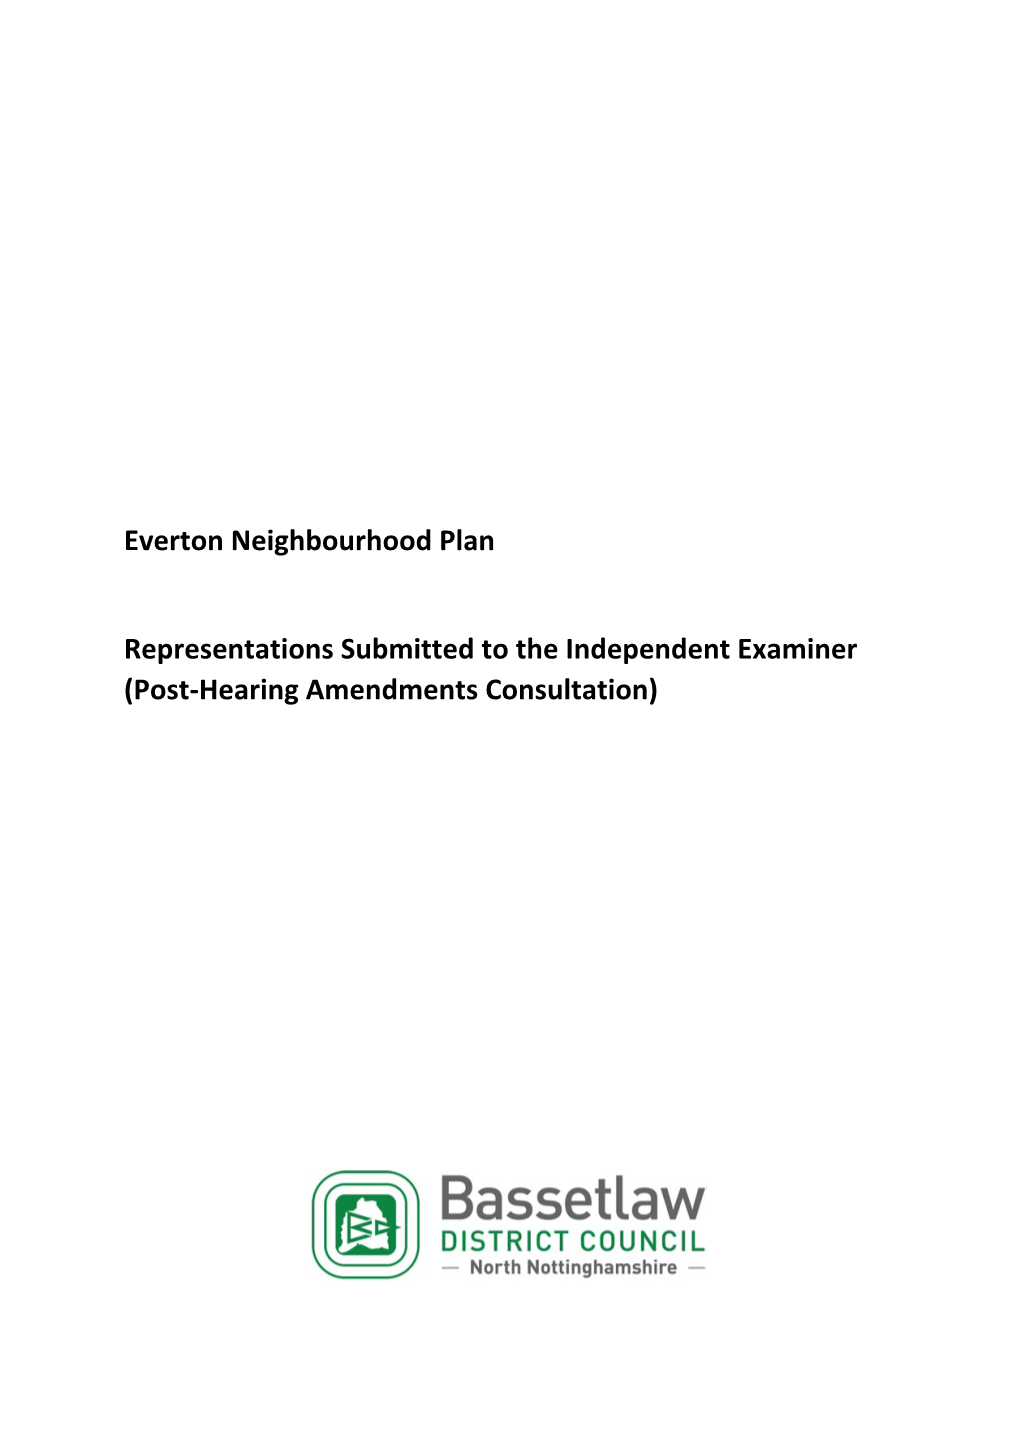 Everton Neighbourhood Plan Representations Submitted to the Independent Examiner (Post-Hearing Amendments Consultation)